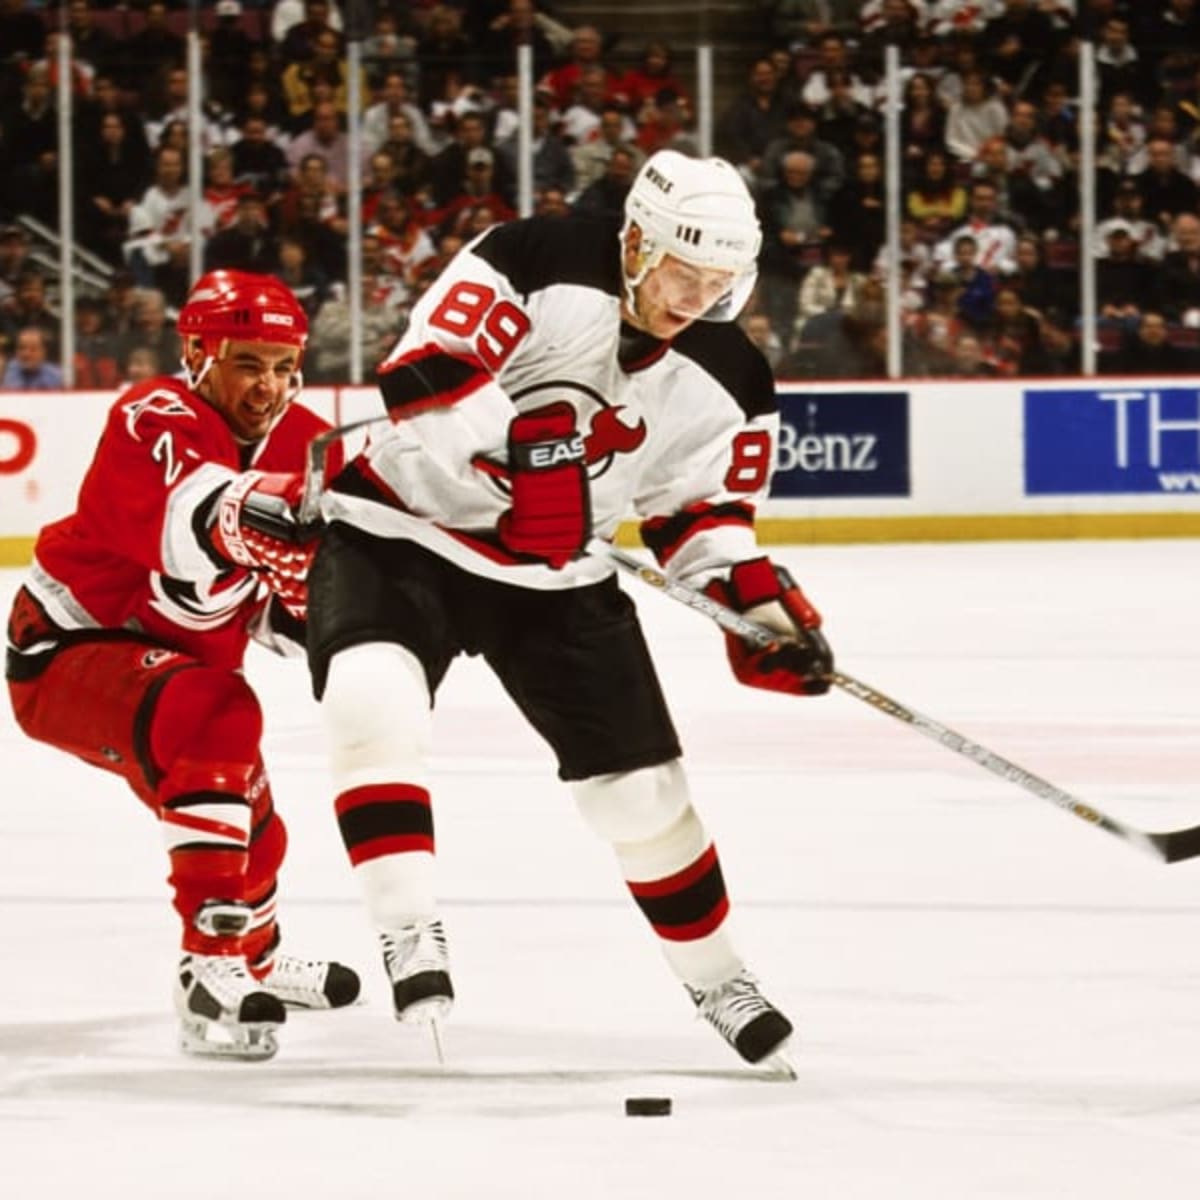 NHL99: Alexander Mogilny's brilliance and his curious absence from